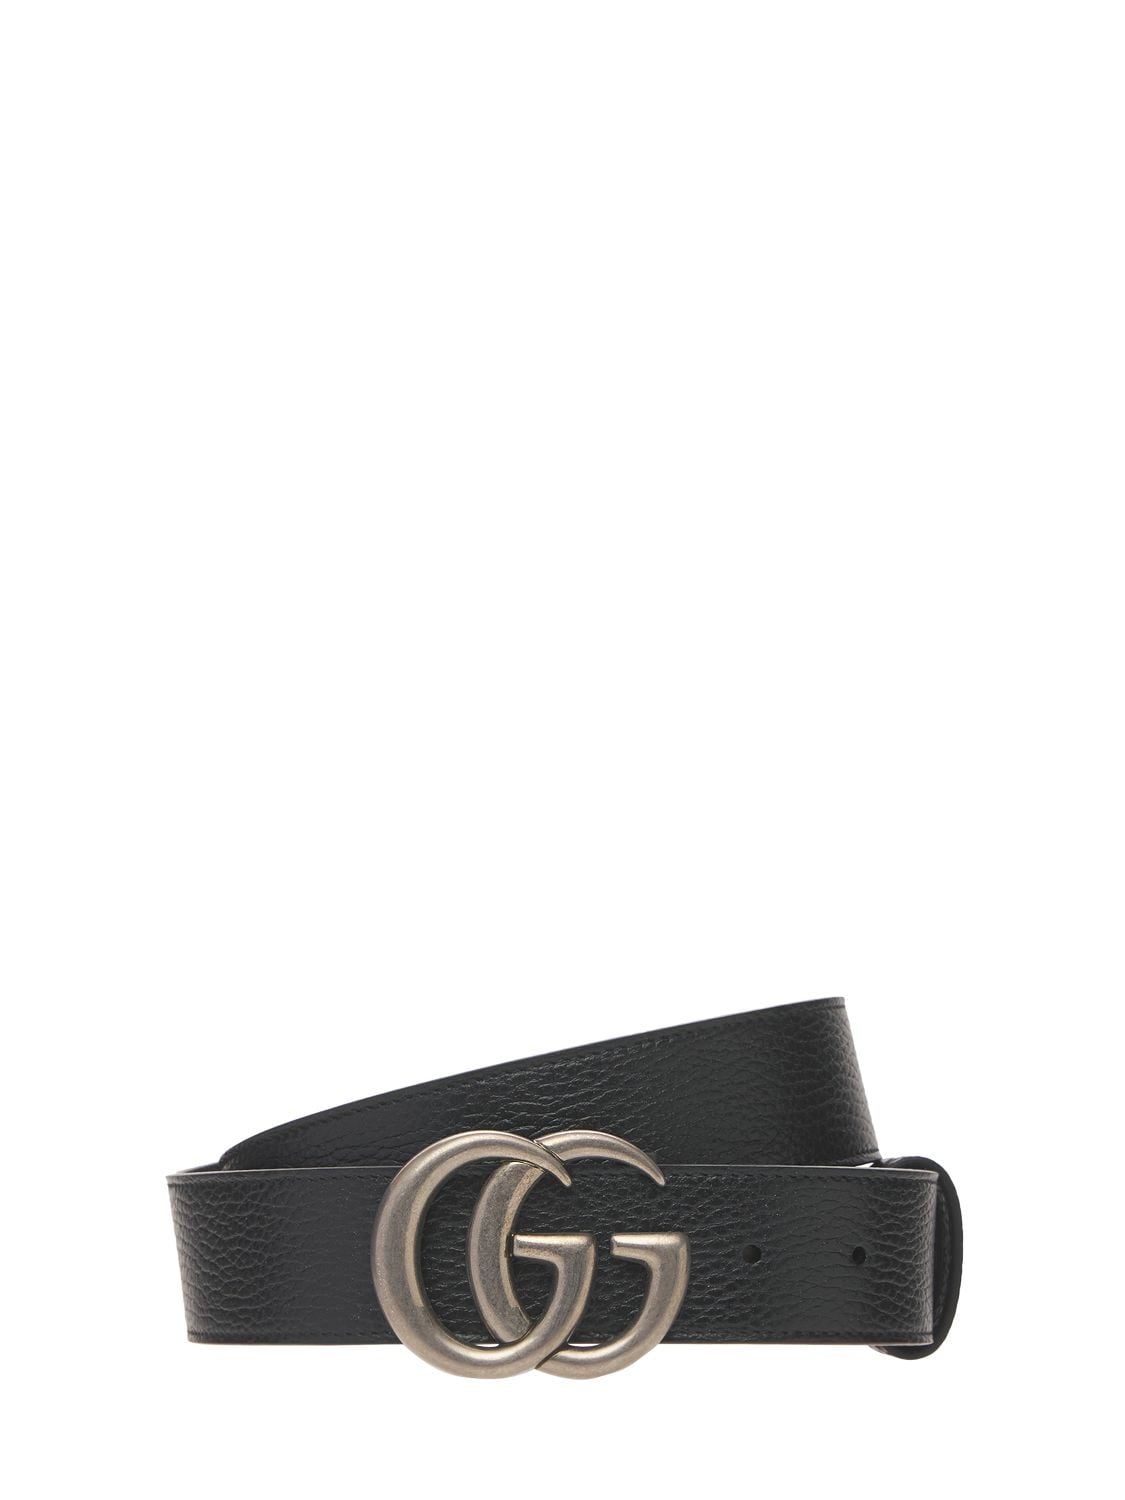 GG Marmont reversible thin belt in white and pink leather